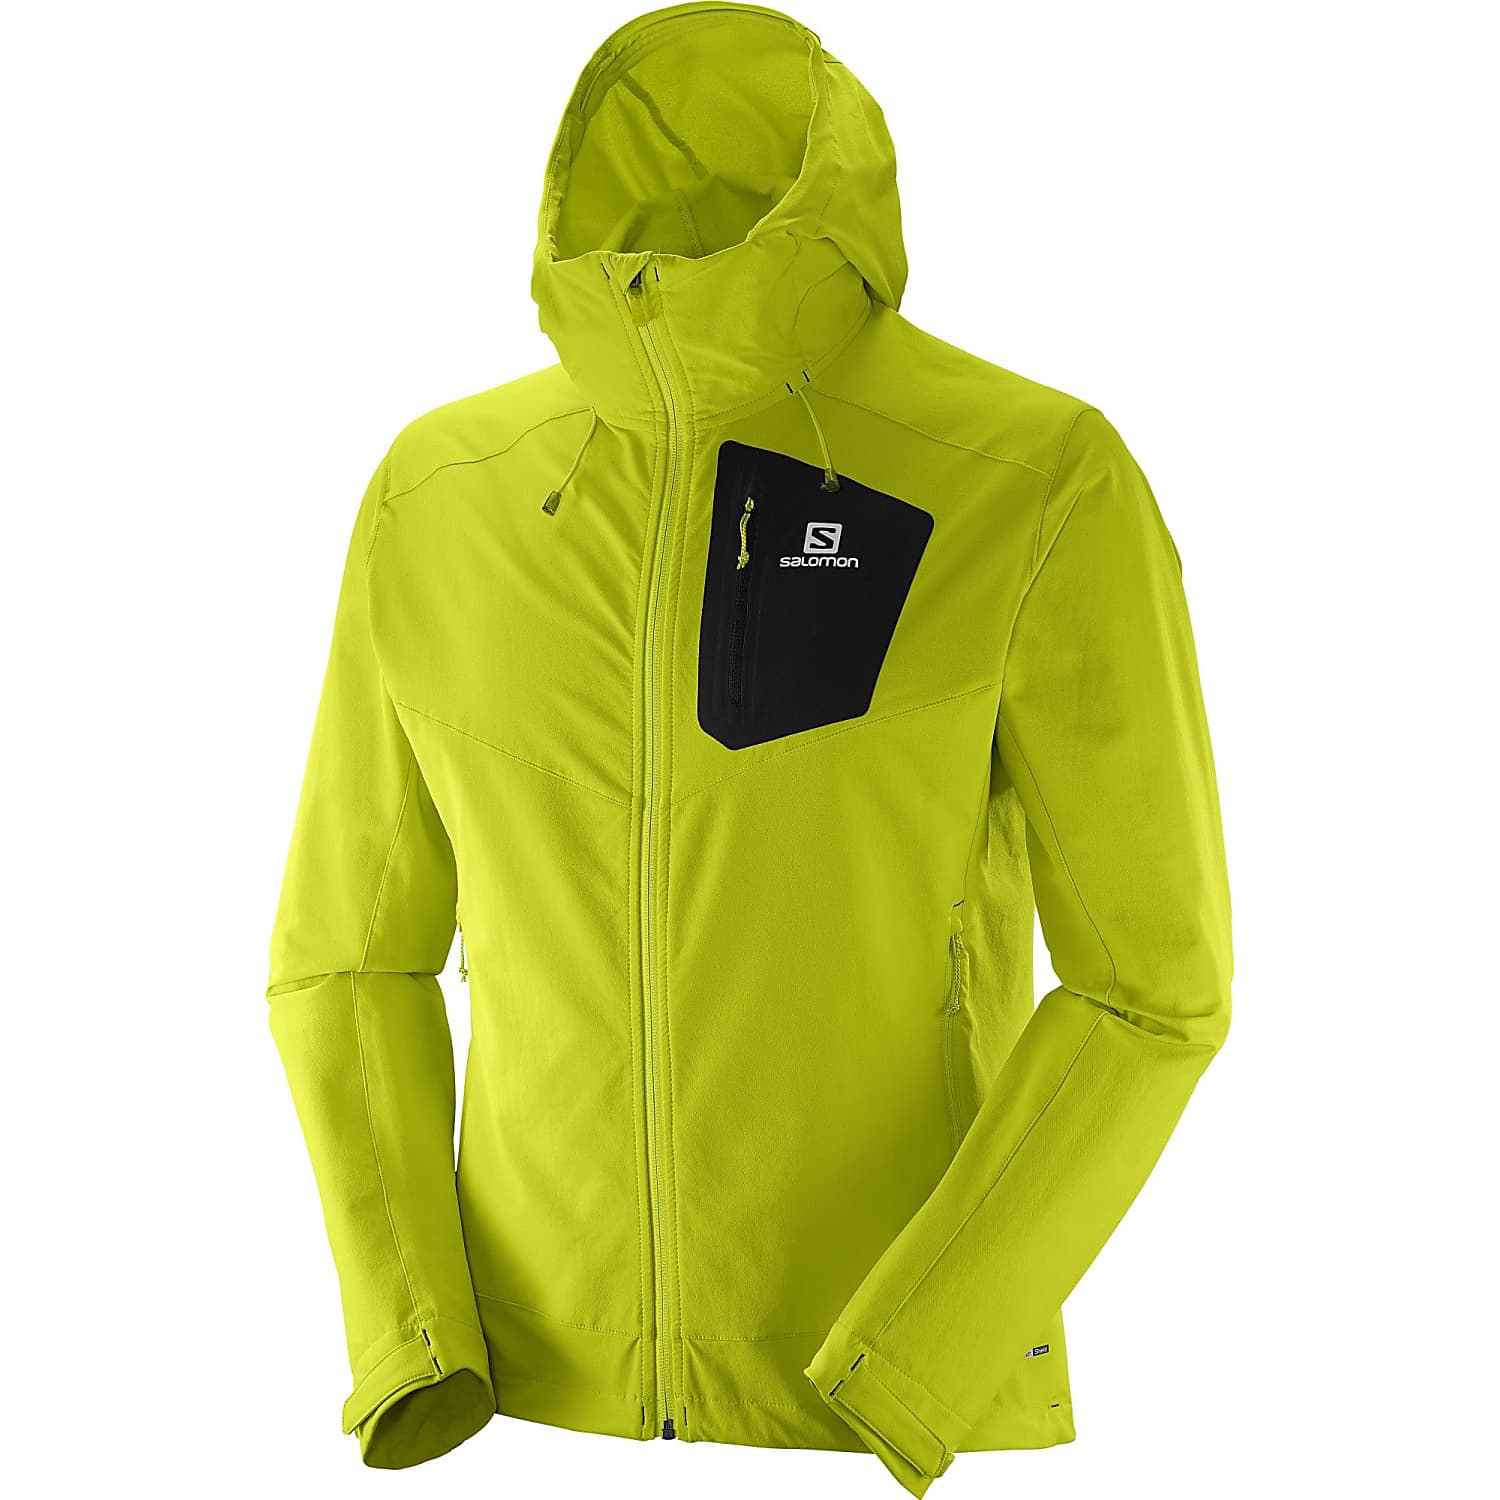 M RANGER SOFTSHELL JACKET, Lime Punch - Fast and cheap shipping - www.exxpozed.com